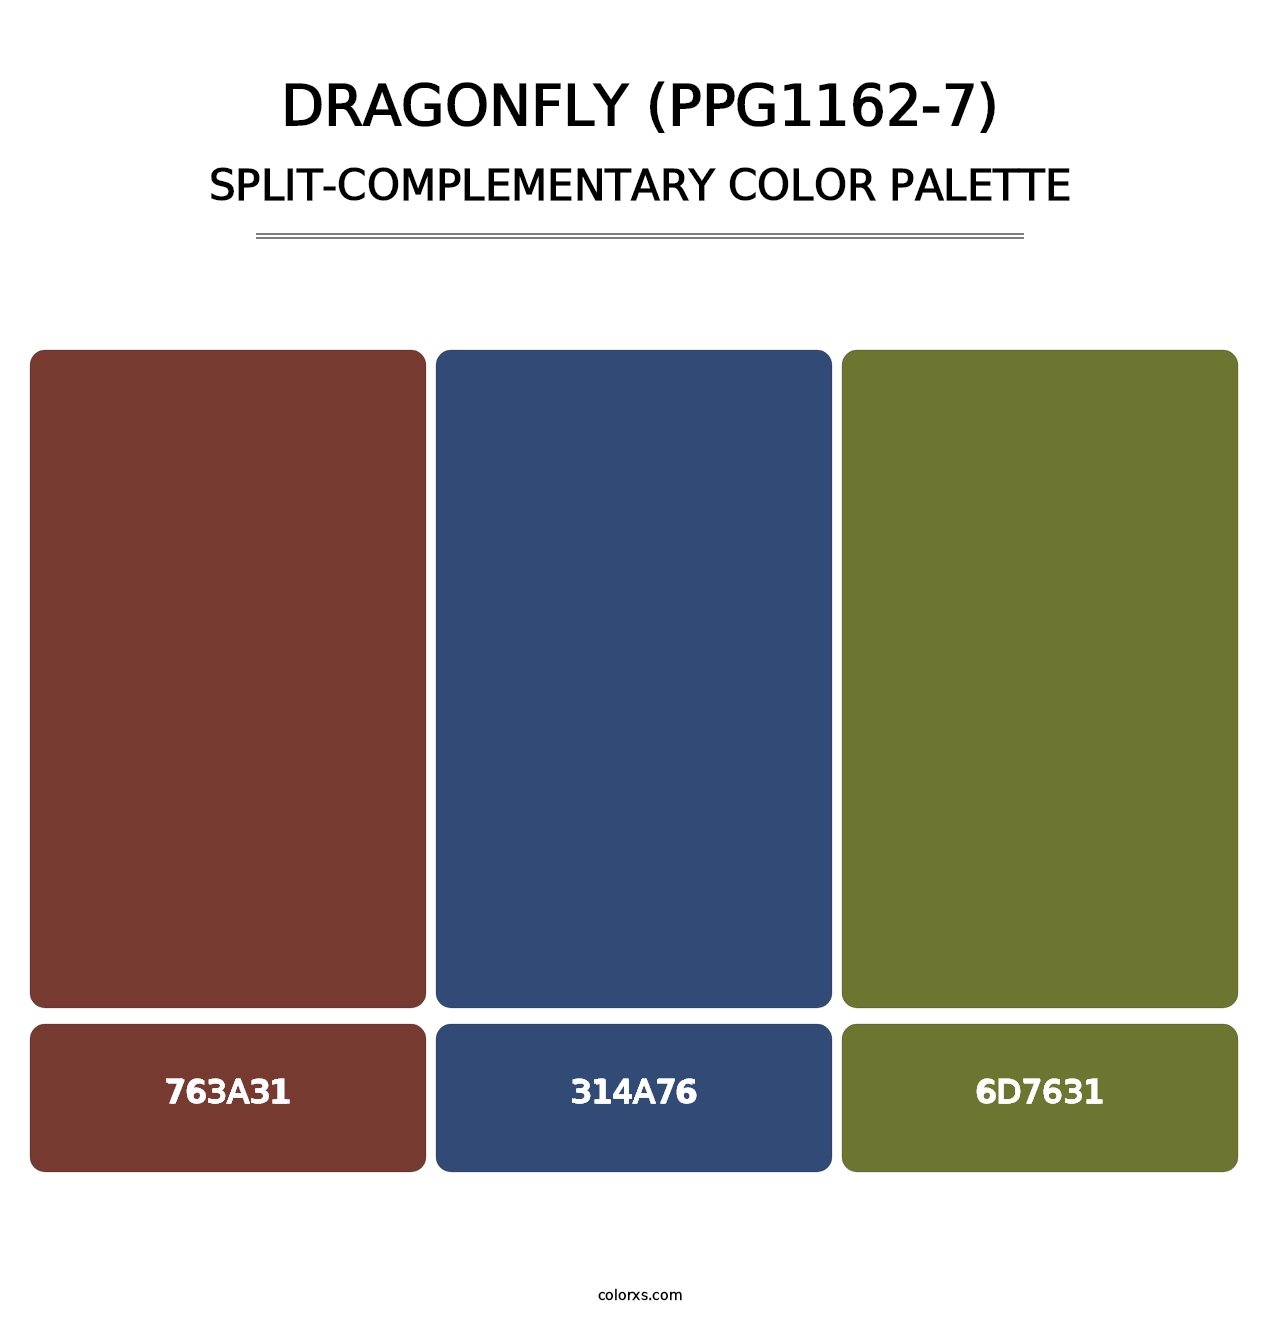 Dragonfly (PPG1162-7) - Split-Complementary Color Palette